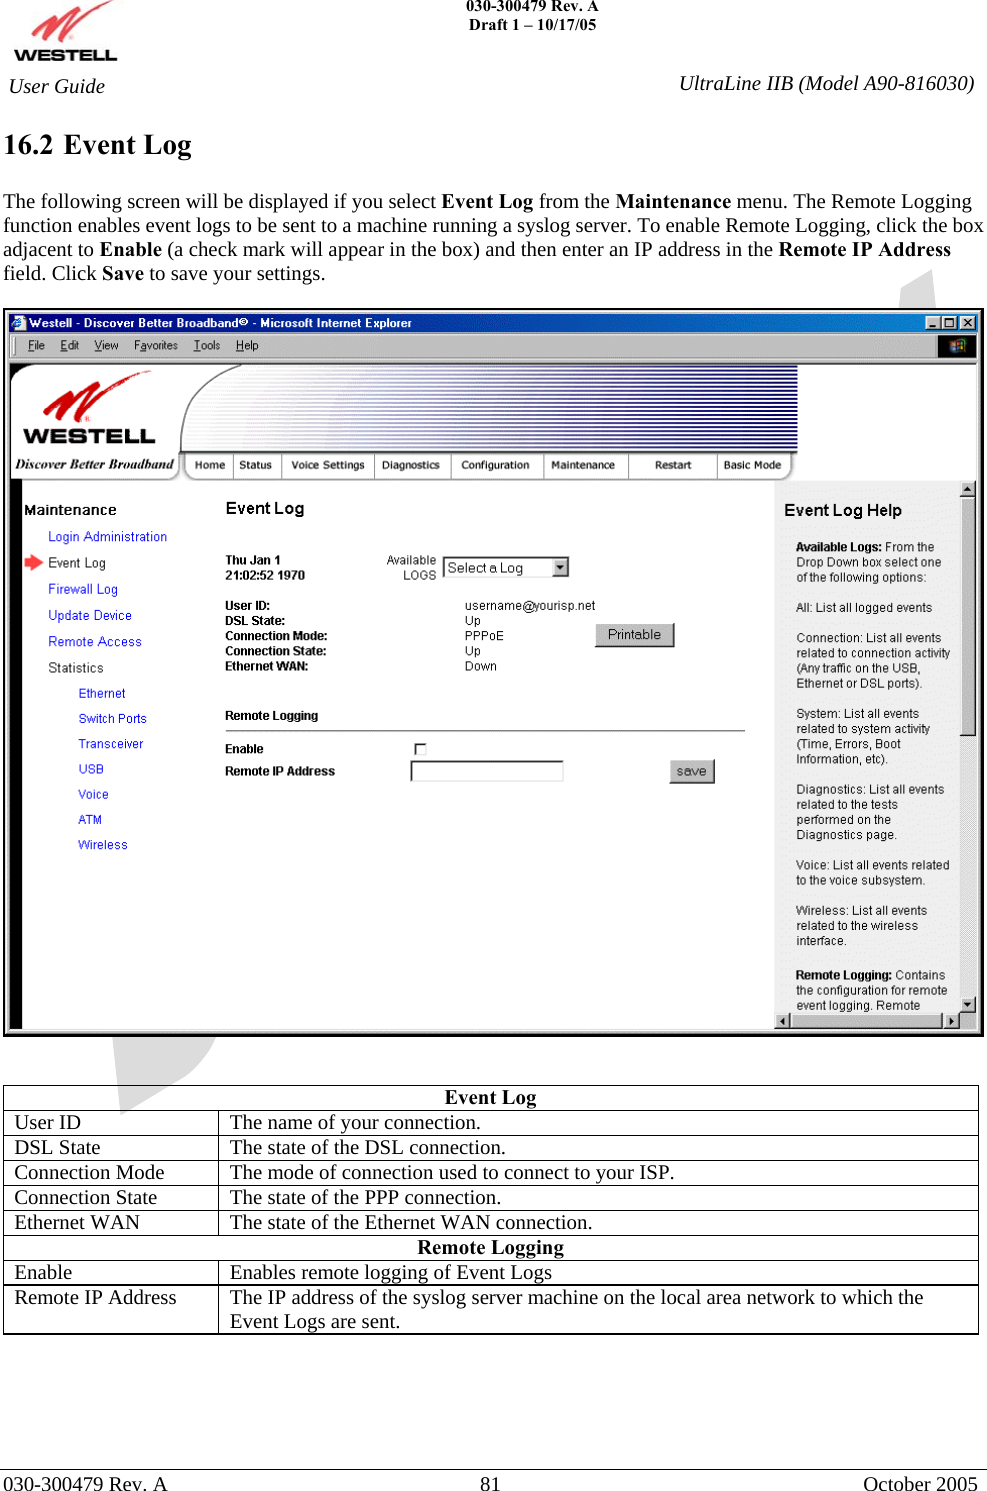    030-300479 Rev. A Draft 1 – 10/17/05   030-300479 Rev. A  81  October 2005  User Guide  UltraLine IIB (Model A90-816030)16.2 Event Log  The following screen will be displayed if you select Event Log from the Maintenance menu. The Remote Logging function enables event logs to be sent to a machine running a syslog server. To enable Remote Logging, click the box adjacent to Enable (a check mark will appear in the box) and then enter an IP address in the Remote IP Address field. Click Save to save your settings.     Event Log User ID  The name of your connection. DSL State  The state of the DSL connection. Connection Mode  The mode of connection used to connect to your ISP. Connection State  The state of the PPP connection. Ethernet WAN  The state of the Ethernet WAN connection. Remote Logging Enable  Enables remote logging of Event Logs Remote IP Address  The IP address of the syslog server machine on the local area network to which the Event Logs are sent.      